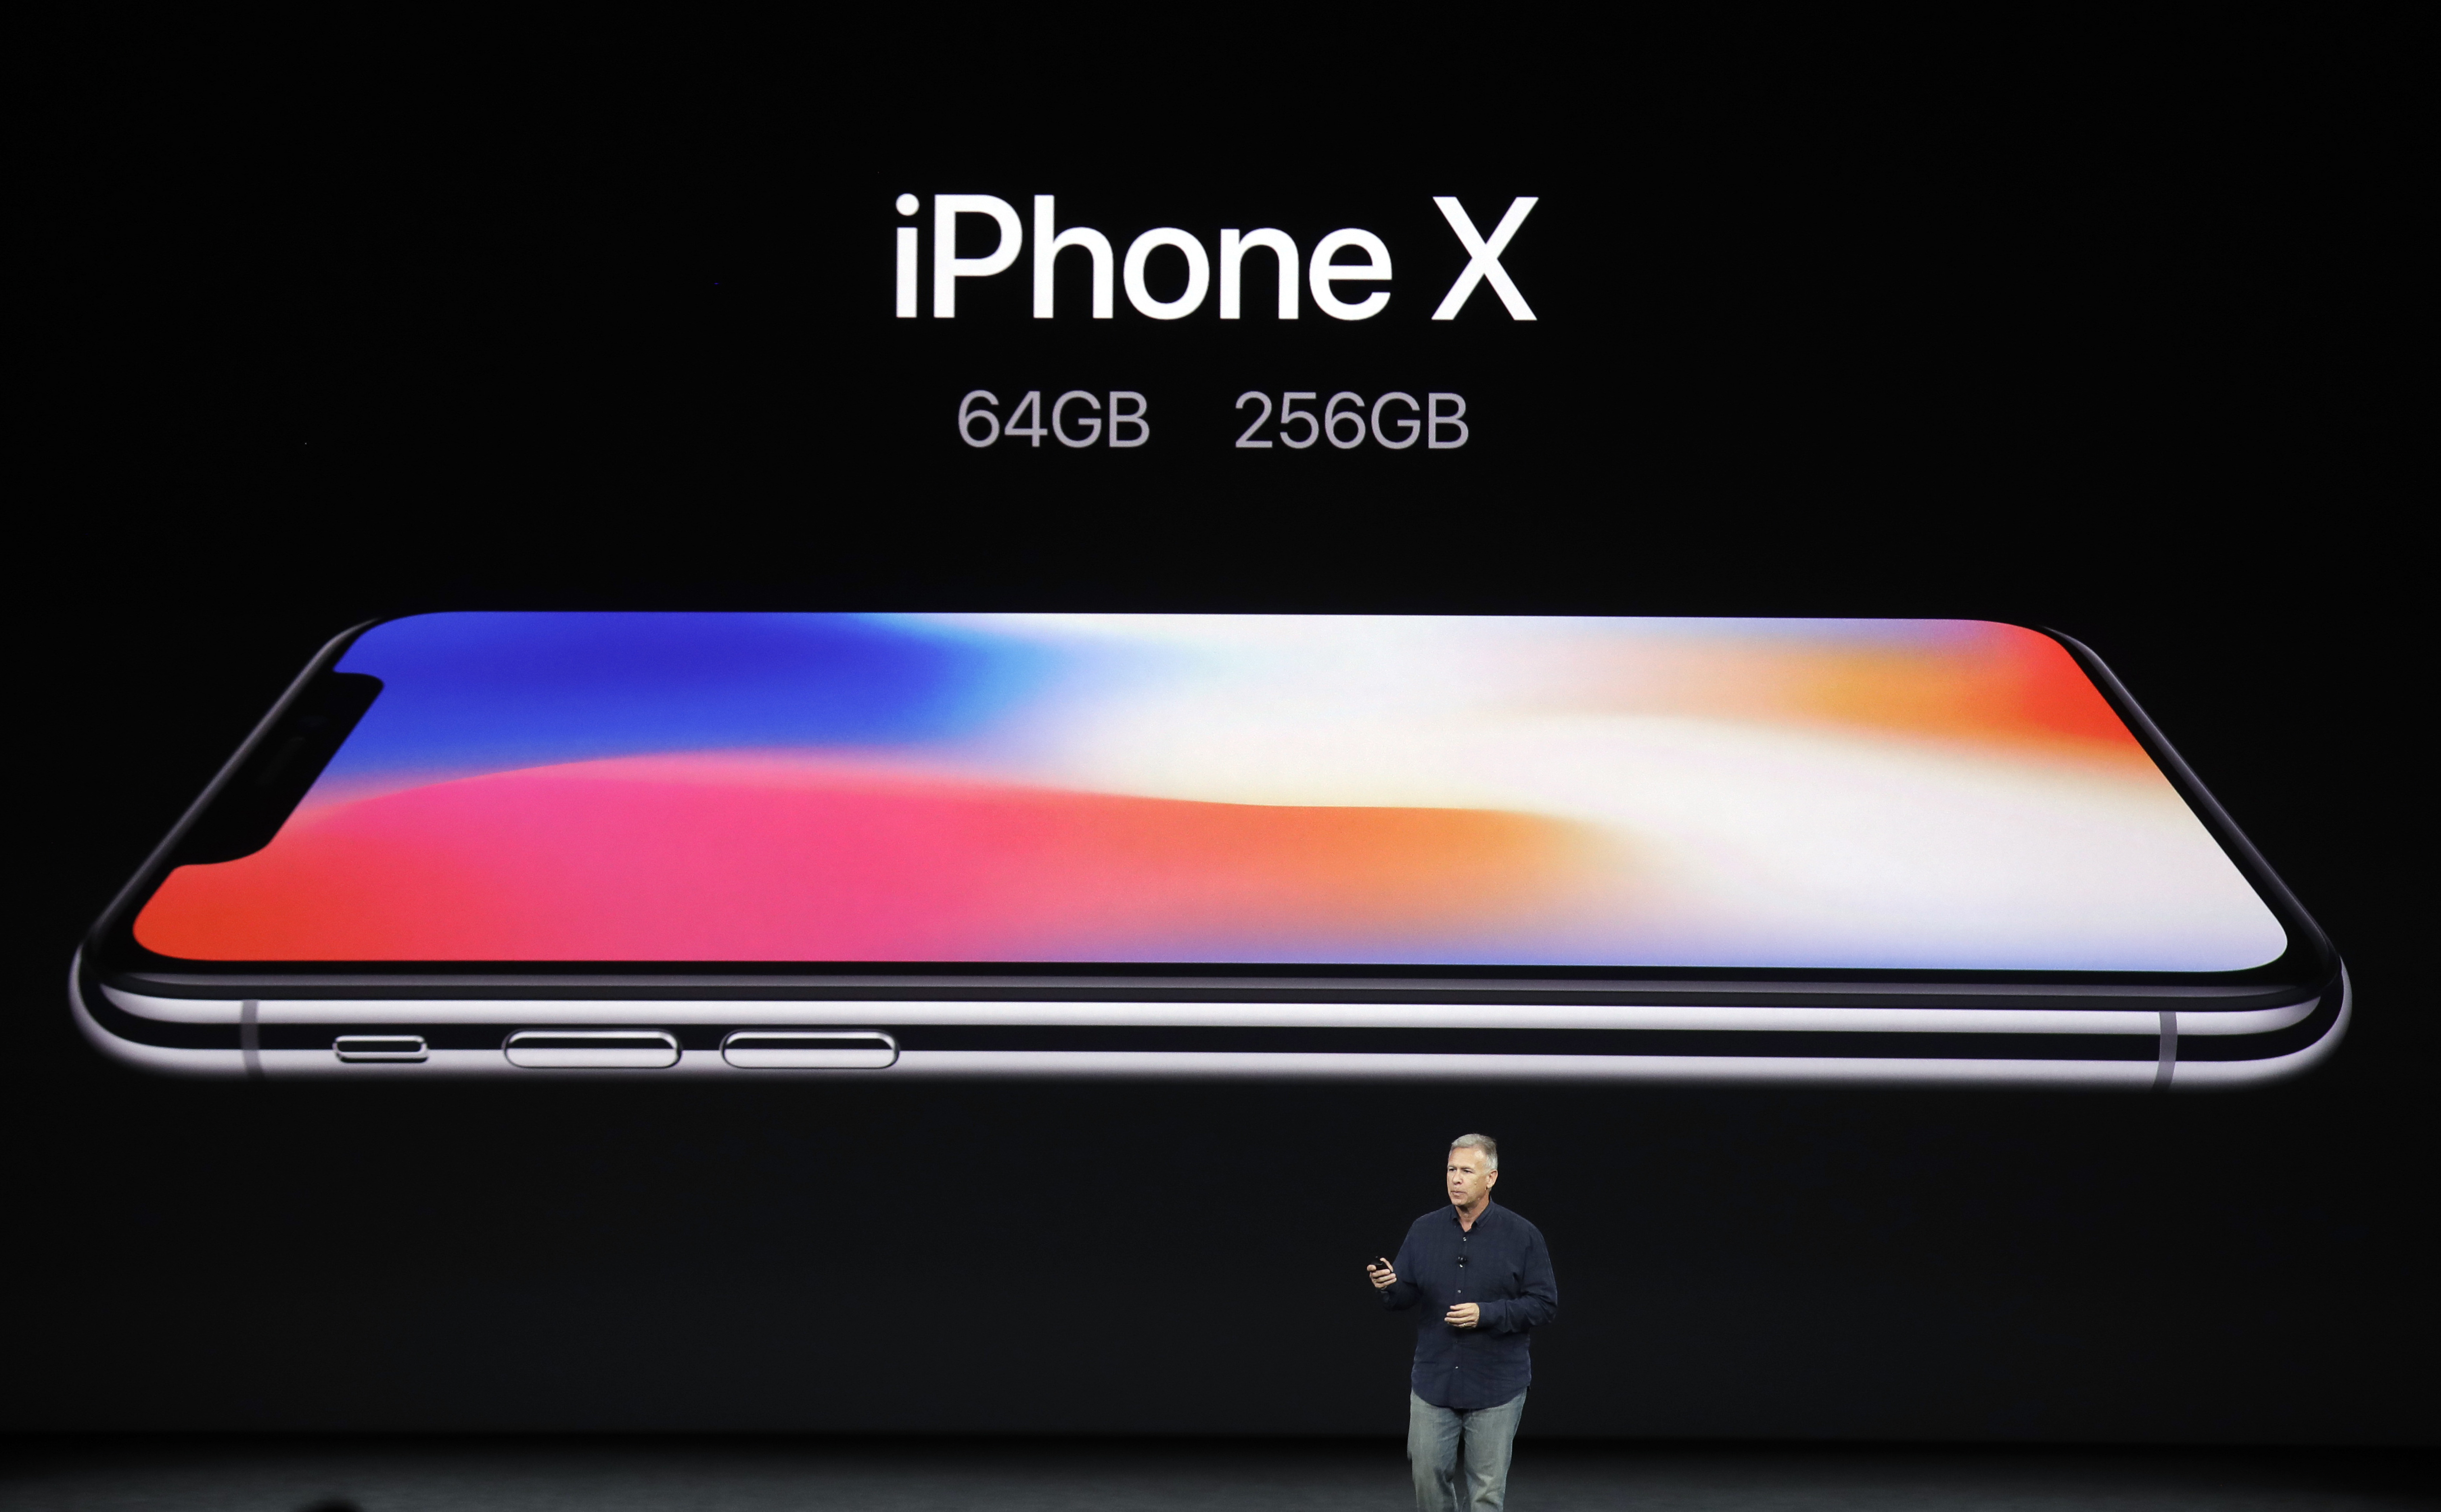 The Apple event iPhone X launch